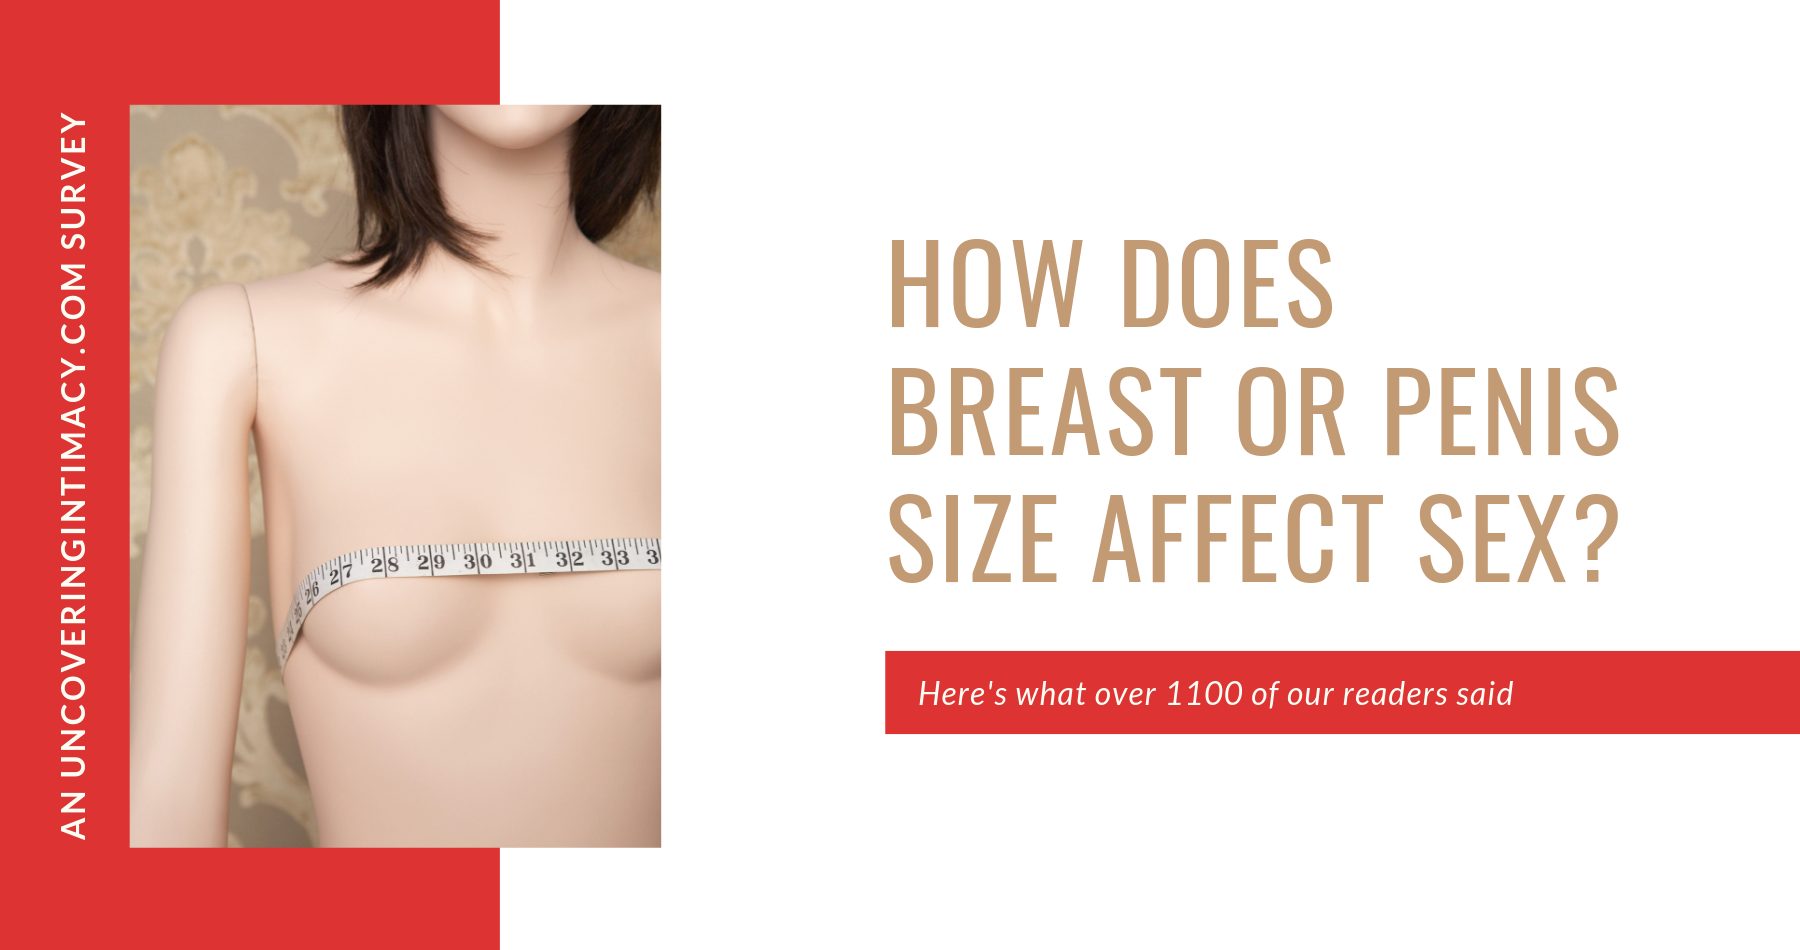 How does breast or penis size affect sex?